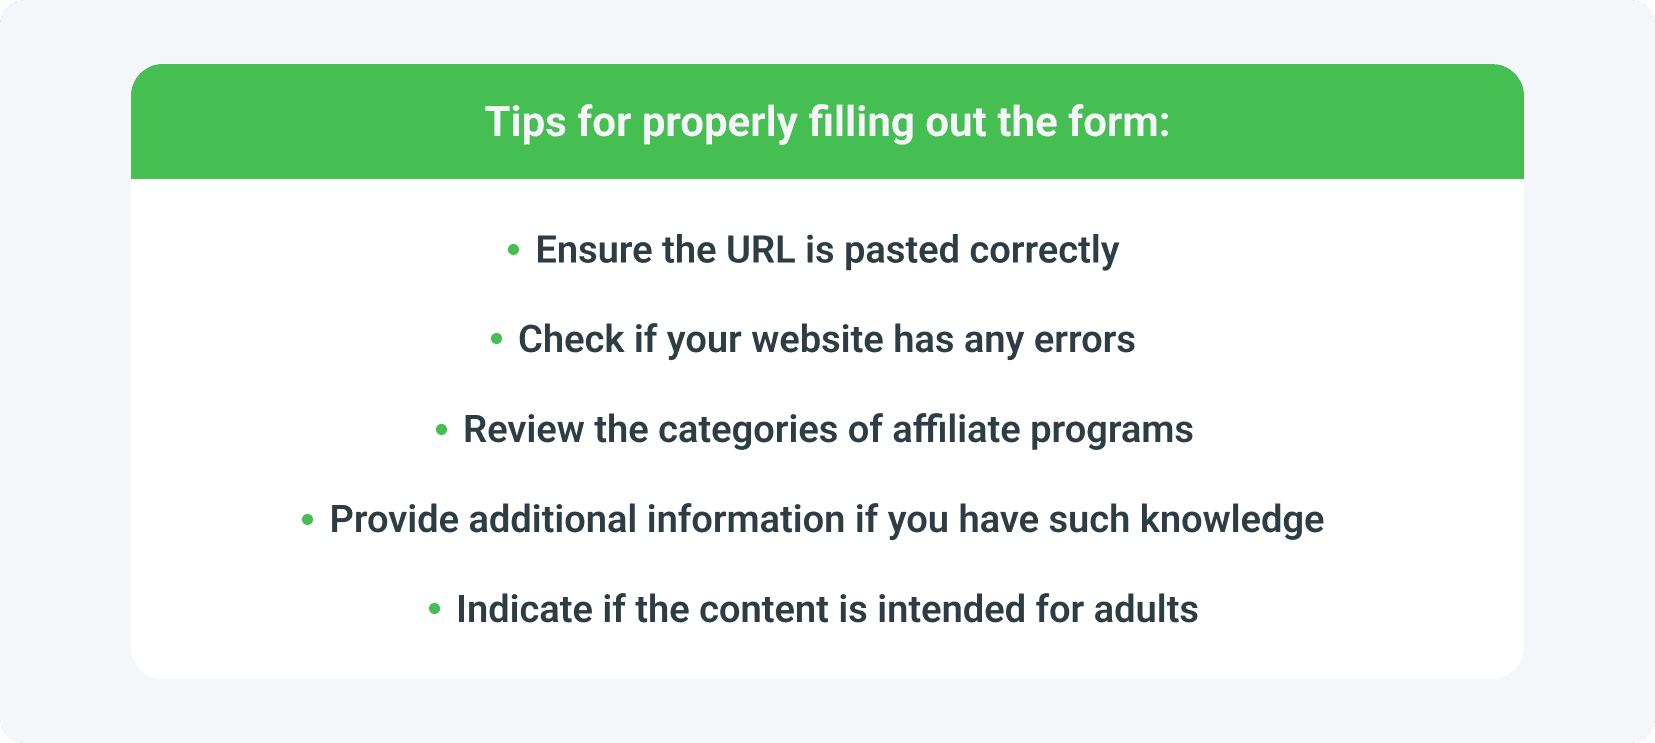 Tips for properly filling out the form